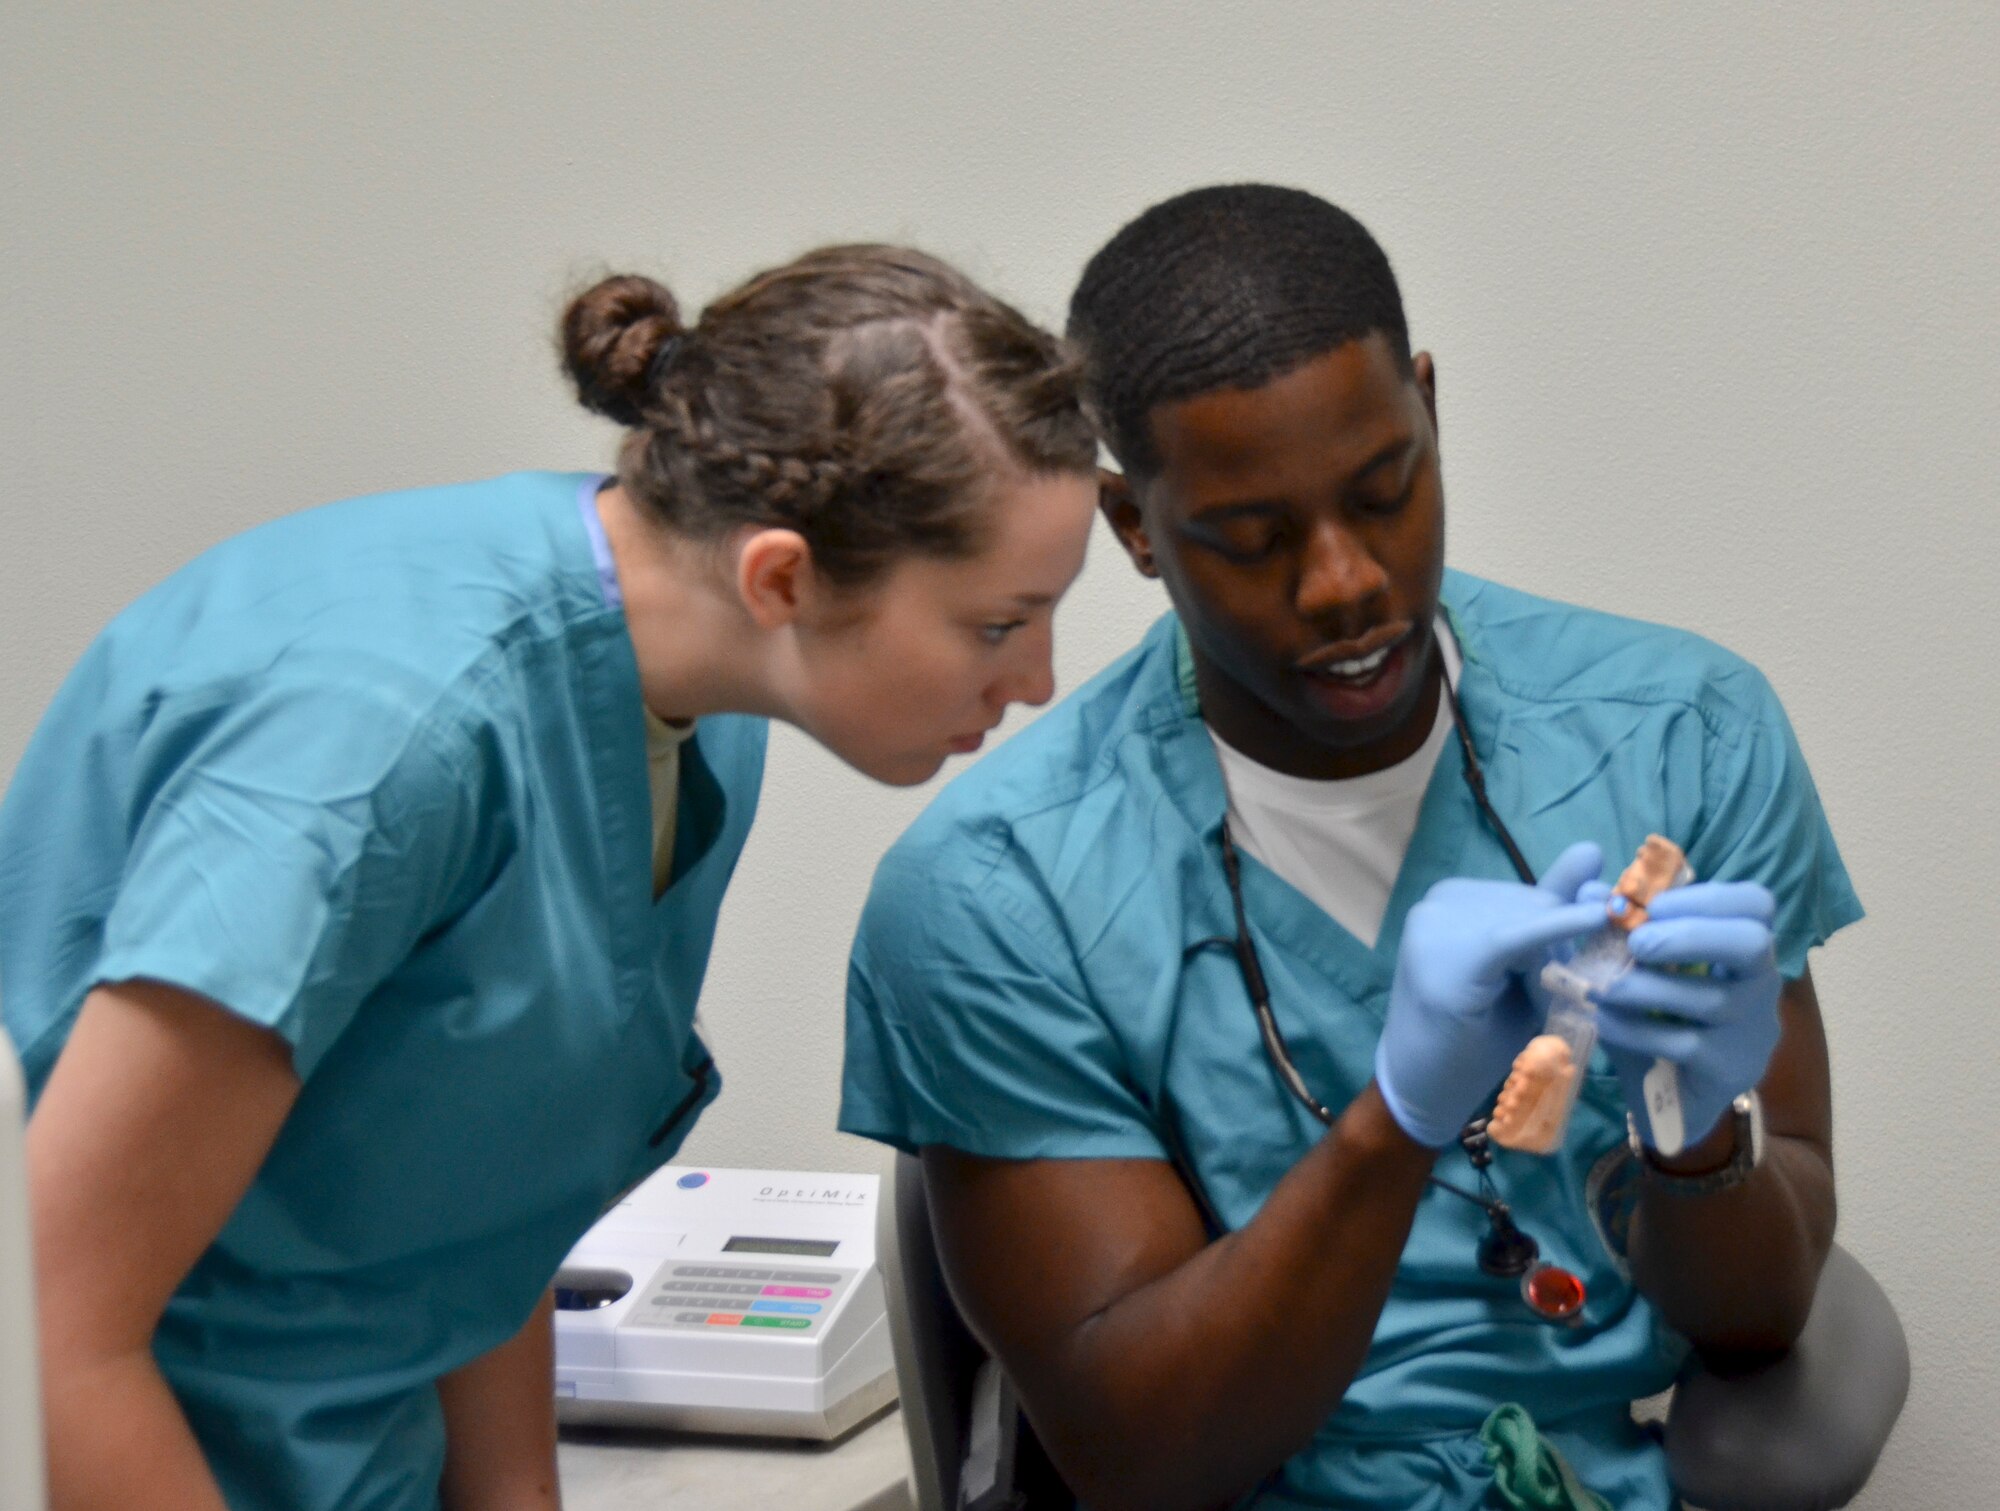 Lt. Webster K. Felix (right), general dentist, Naval Branch Health Clinic, Naval Base San Diego and Airman 1st Class Chayce Shelton, dental technician, 117th Medical Group, discuss a dental procedure in San Diego, Calif., June 23, 2016.  The 117 MDG trained with the U.S. Navy at Naval Medical Center San Diego.  The training included Airmen being implemented in real world U.S. Naval operations.  (U.S. Air National Guard photo by Staff Sgt. Jeremy Farson/Released)   